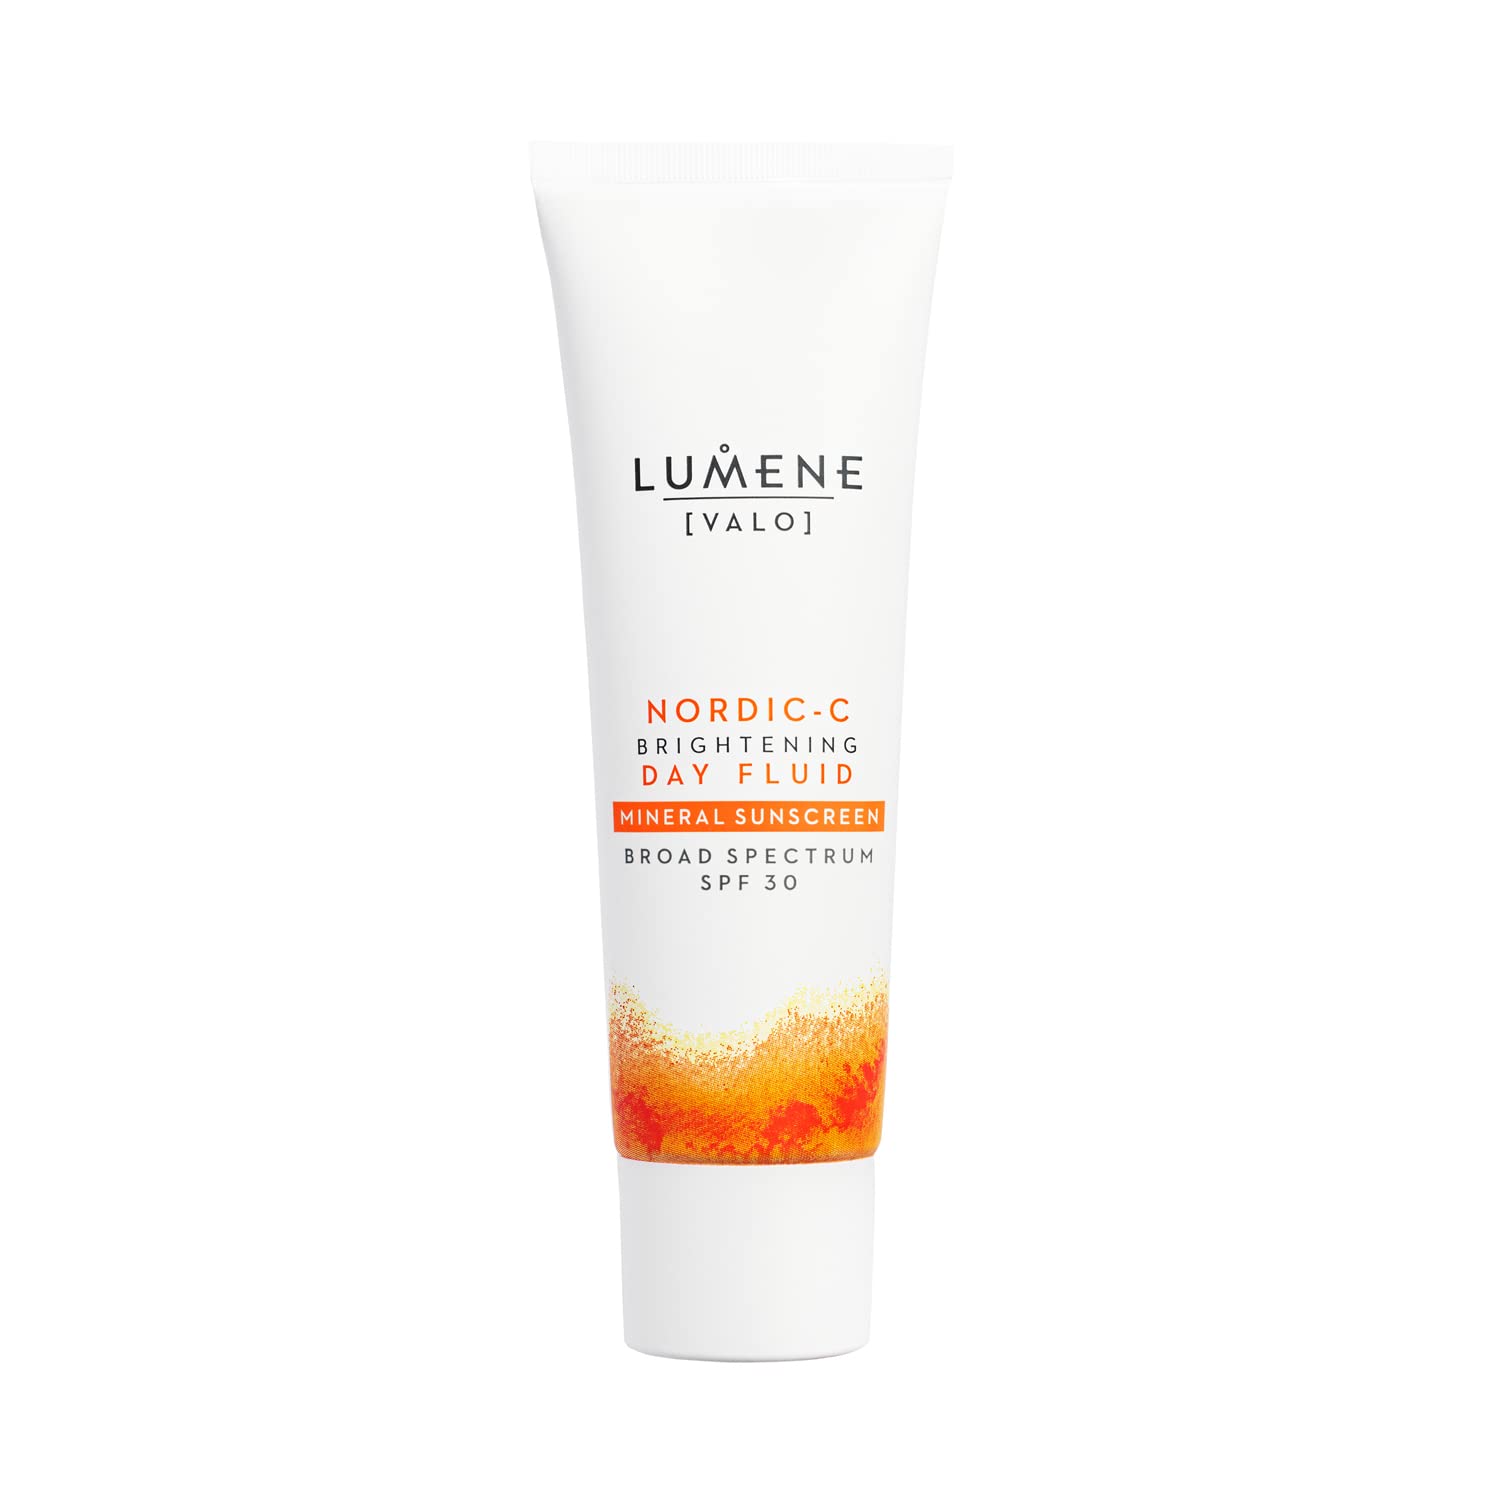 Lumene Nordic-C Radiance ash Day uid Sun Protection - SPF 30 Zinc Oxide Mineral Sunscreen with Vitamin C - Face Sunscreen for All Skin Types (50mL)